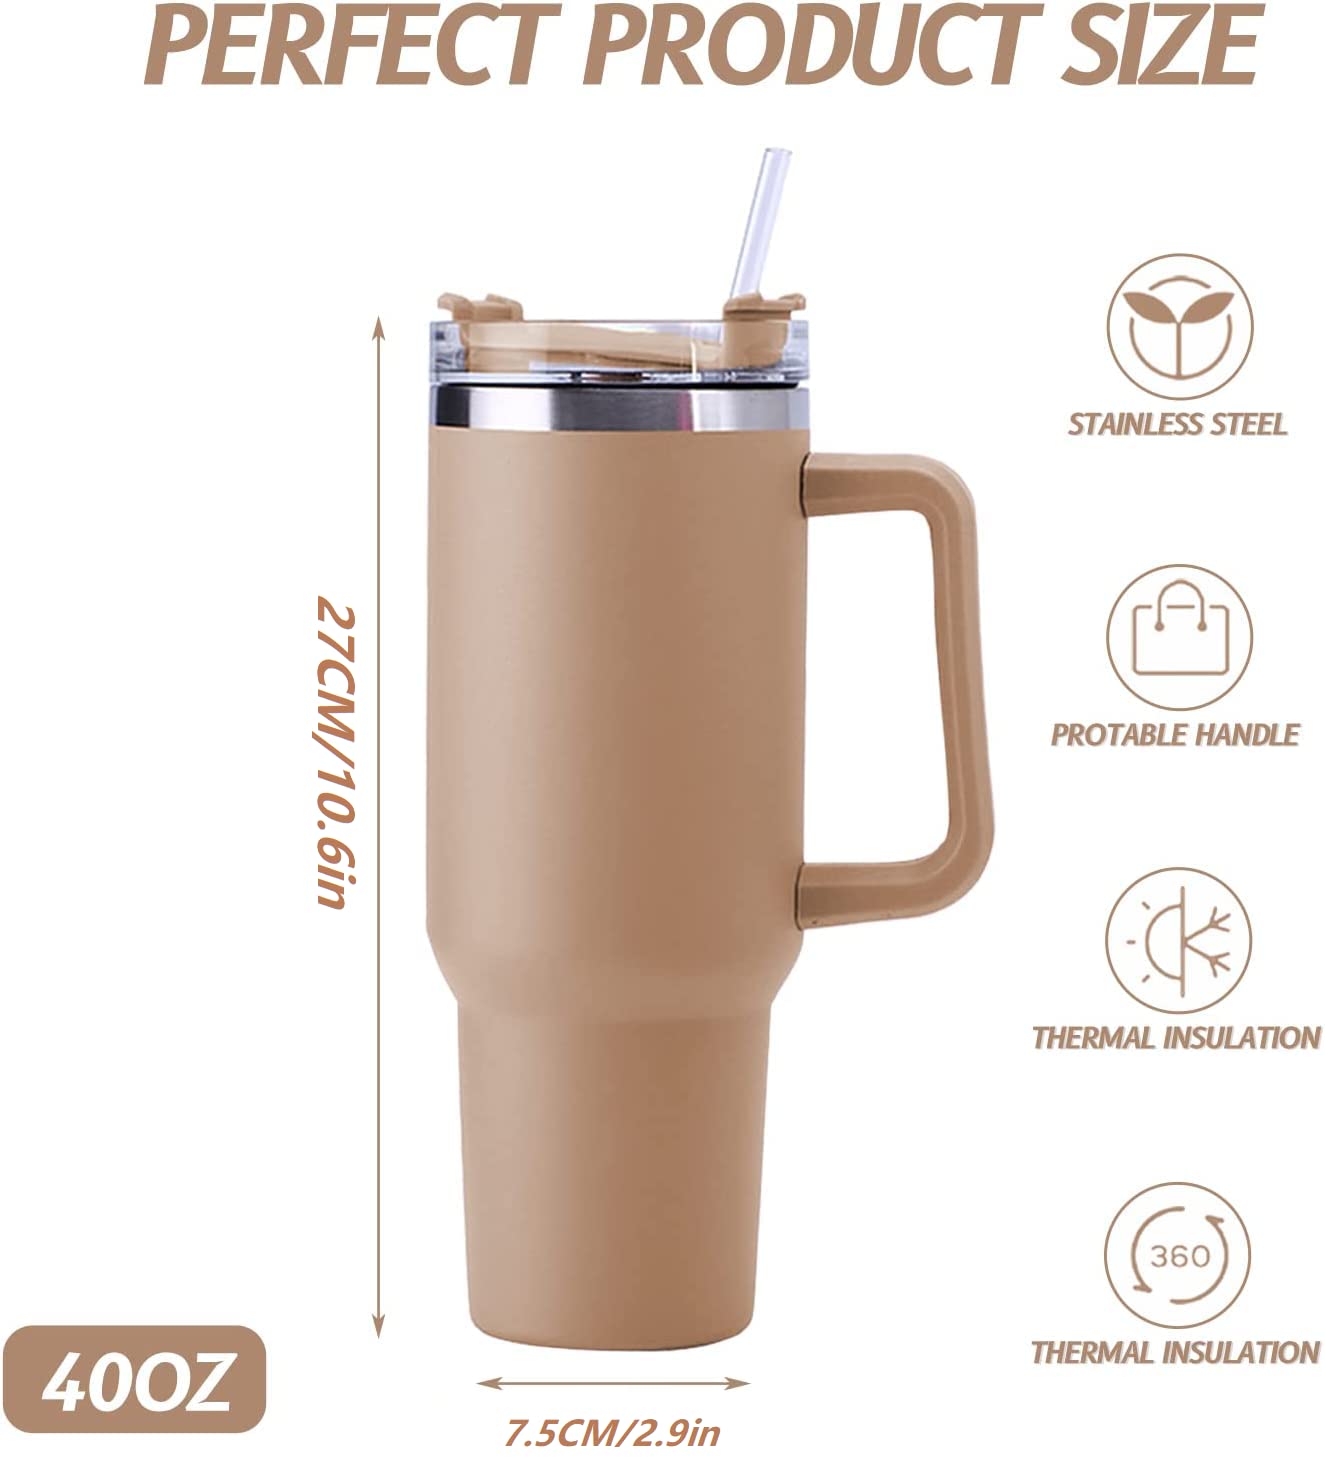 Bileeko 40 oz Tumbler with Handle and Straw, Reusable Stainless Steel Insulated Travel Mug Iced Coffee Cup Maintains Cold, Heat, and Ice for Hours(Driftwood)